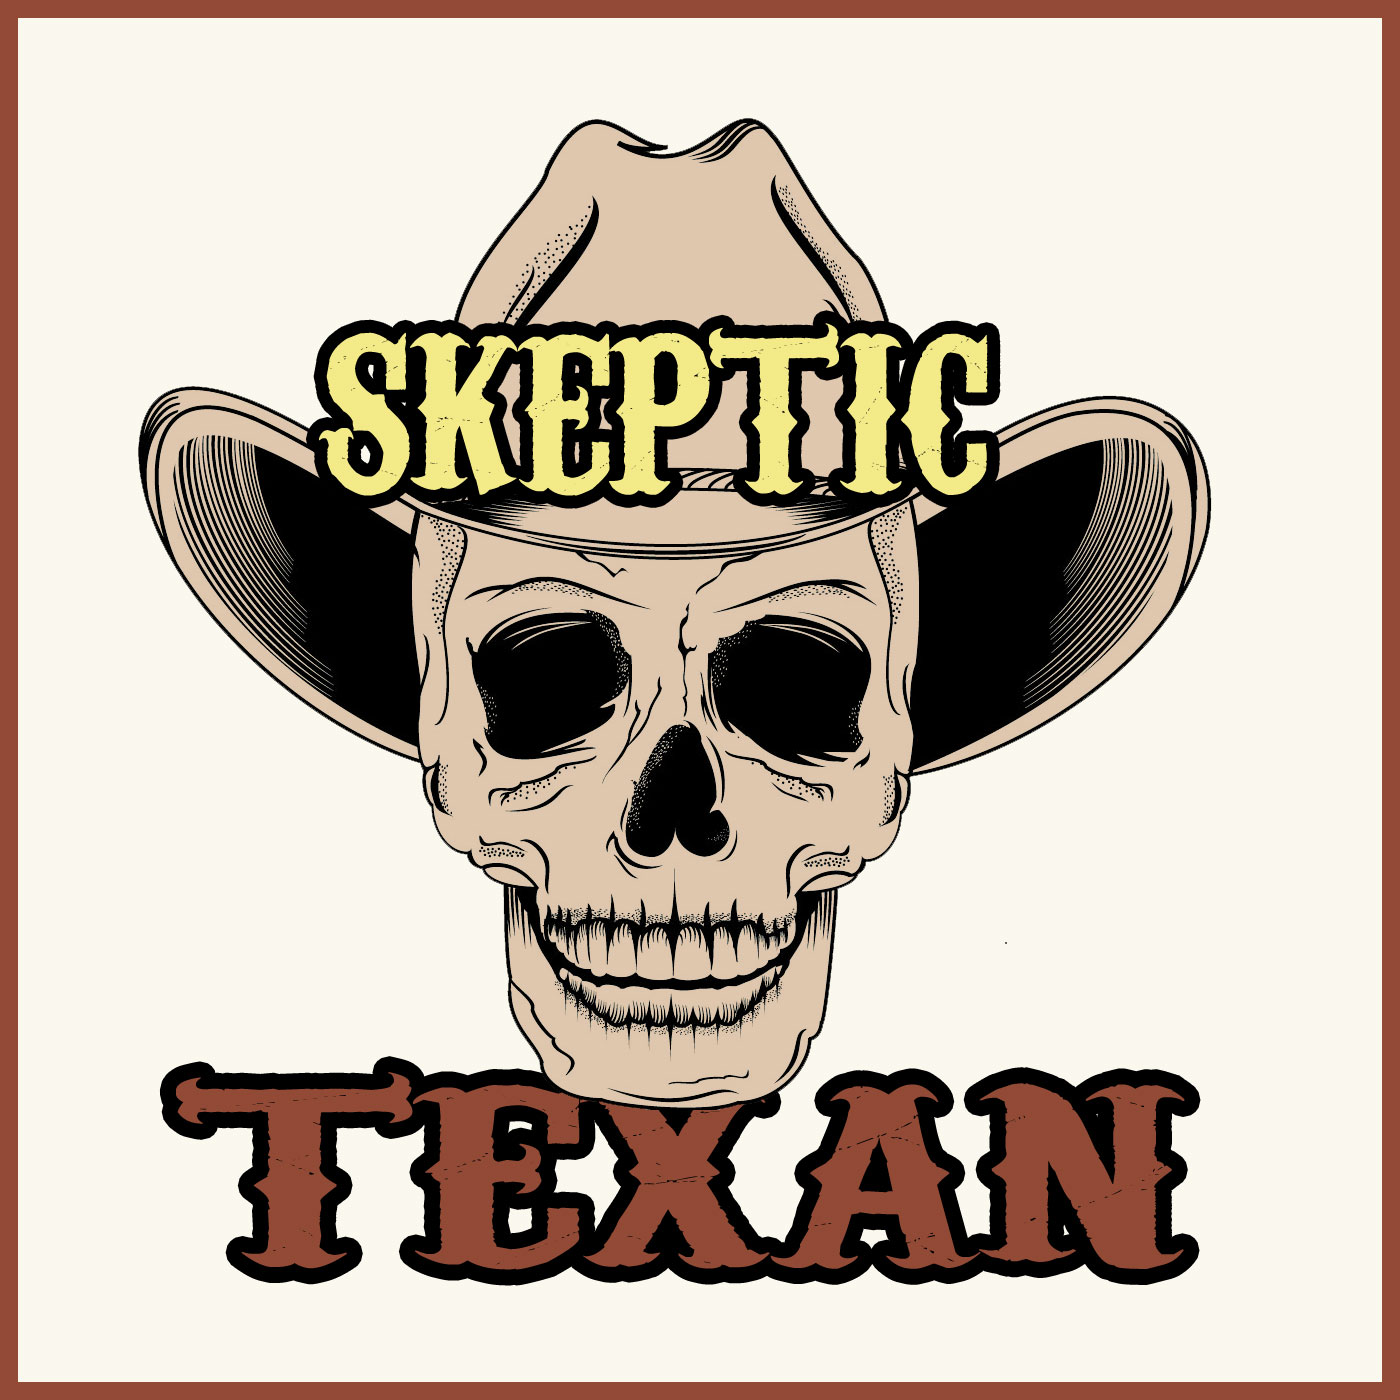 The Skeptic Texan Podcast